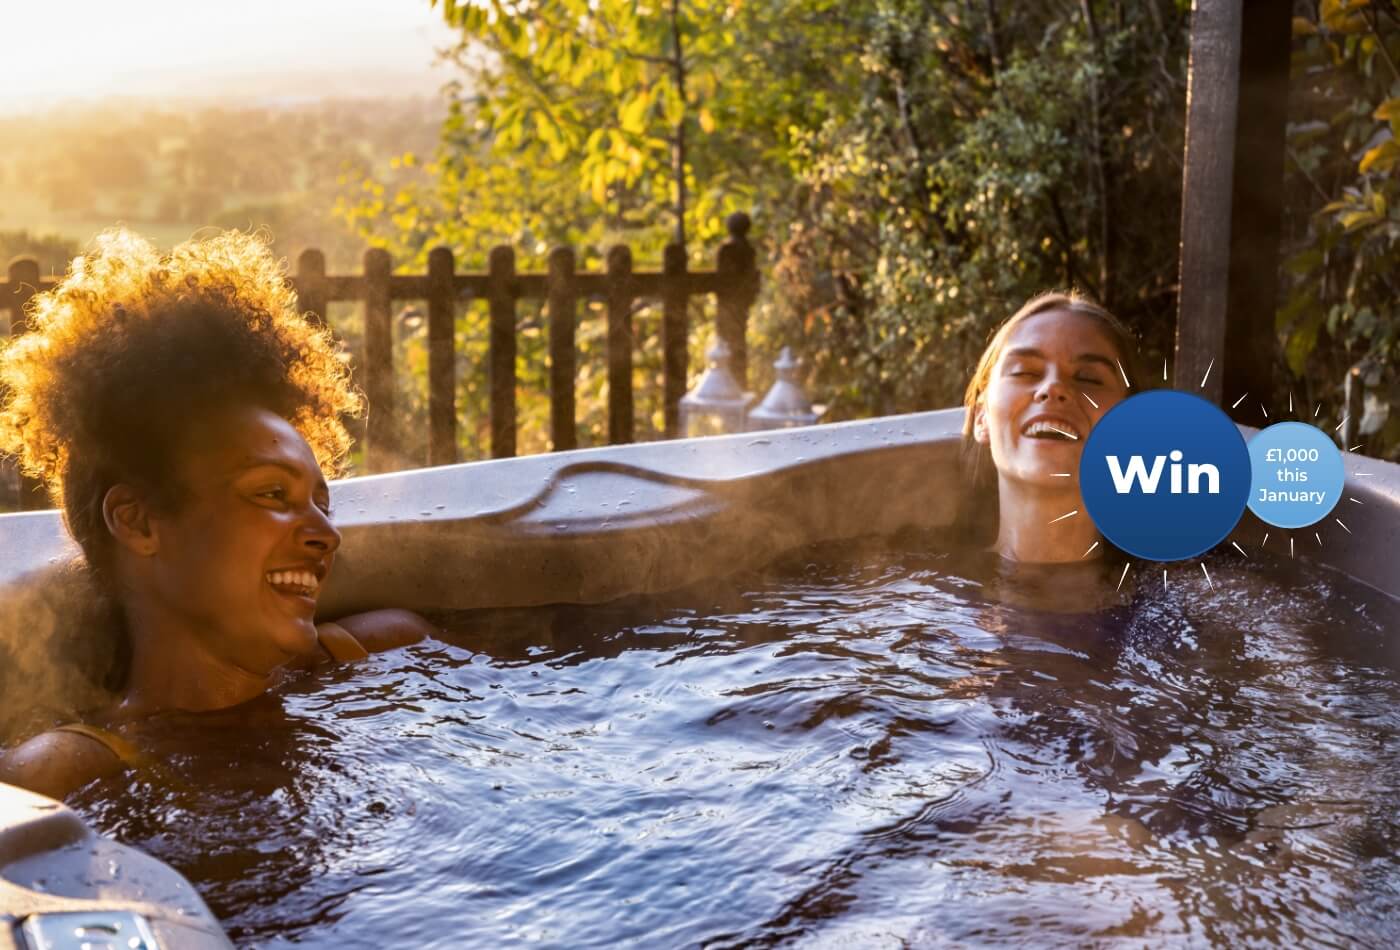 Feature Image of Two Women Relaxing in a Hot Tub and Win Roundel